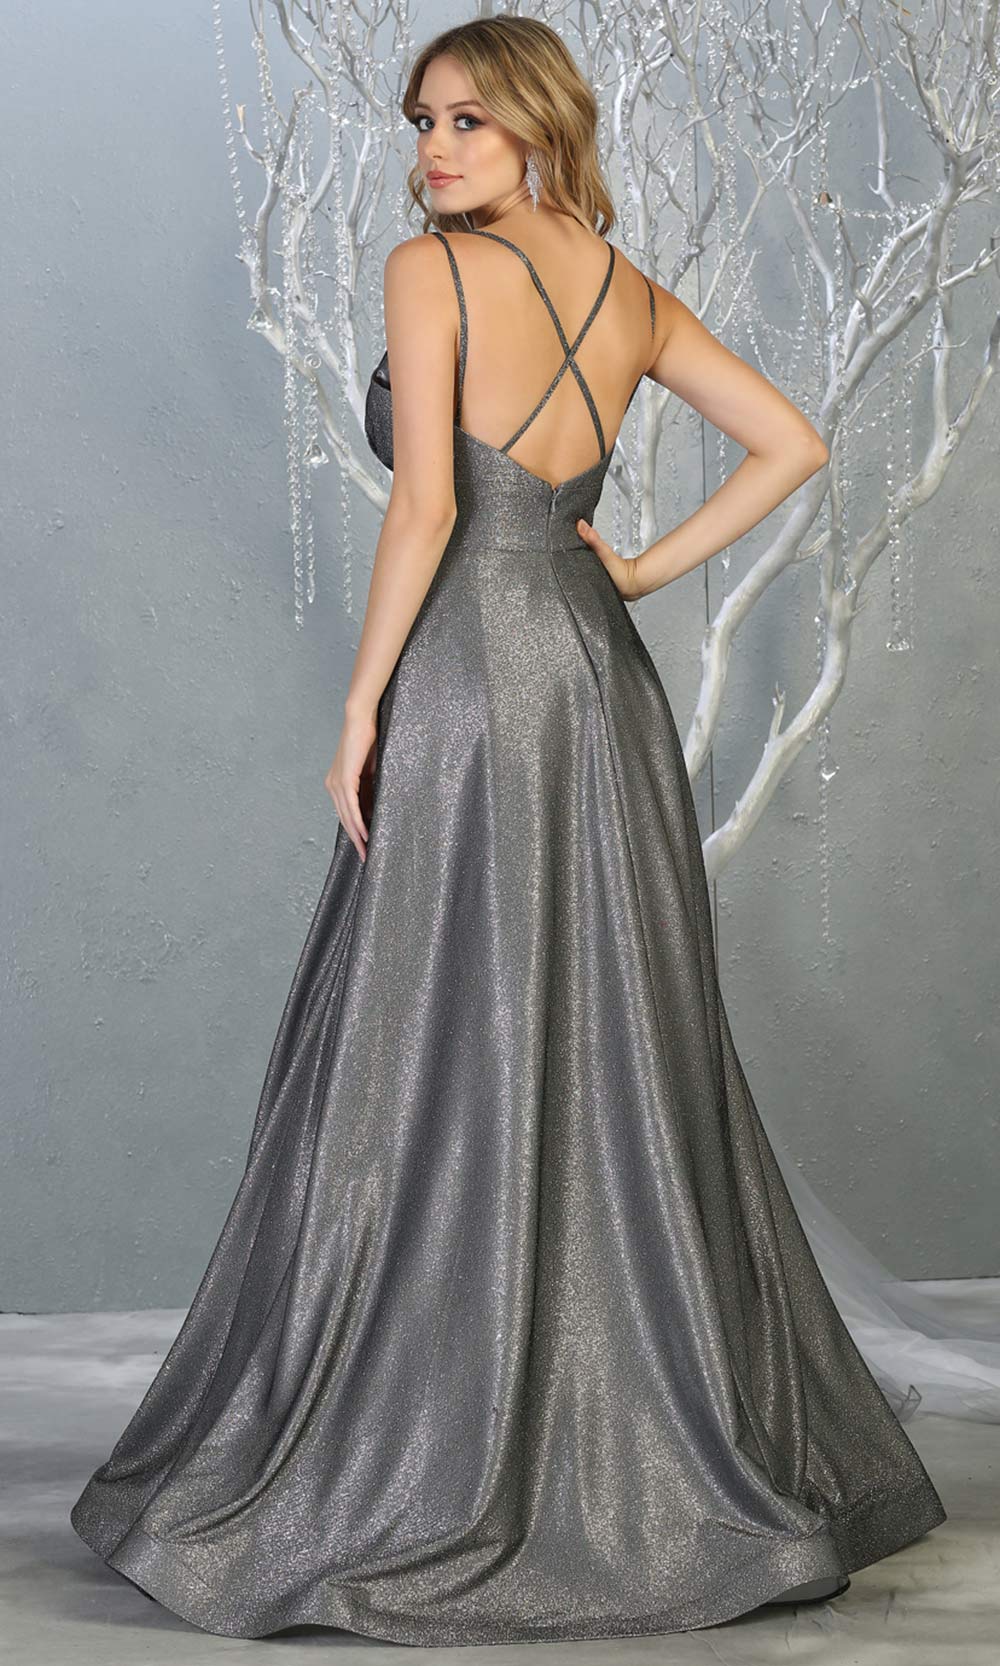 Mayqueen MQ1756 long charcoal gray metallic evening flowy dress w/low back & straps. Full length silver grey gown is perfect for enagagement/e-shoot dress, wedding reception dress, indowestern gown, formal evening party dress, prom. Plus sizes avail-b.jpg